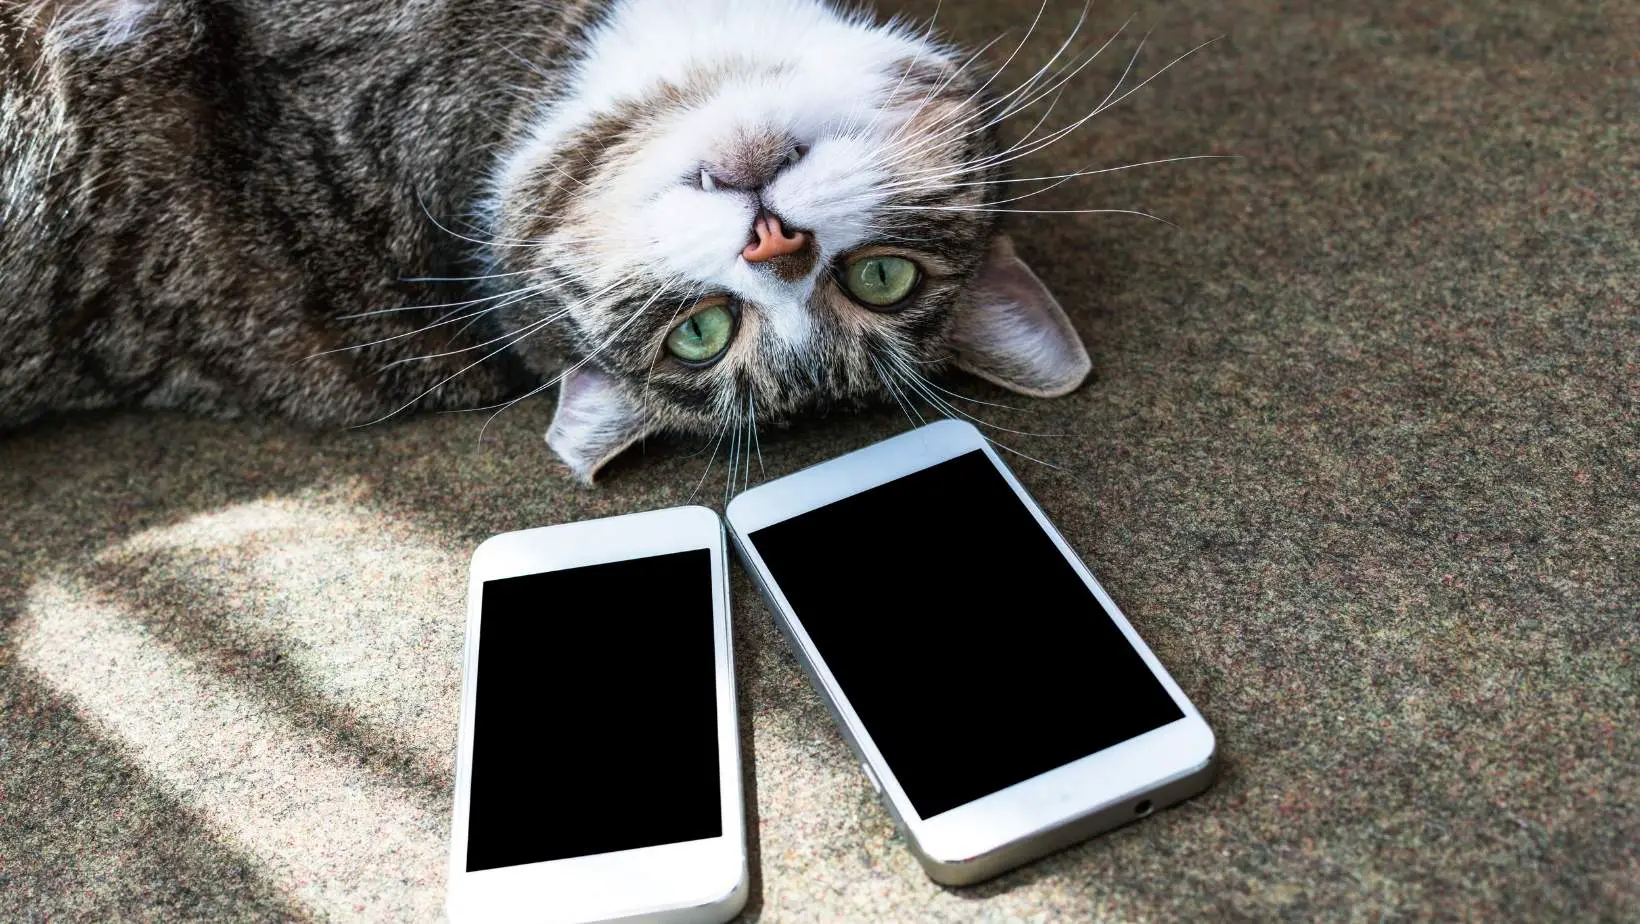 Why Does My Cat Bite My Phone?